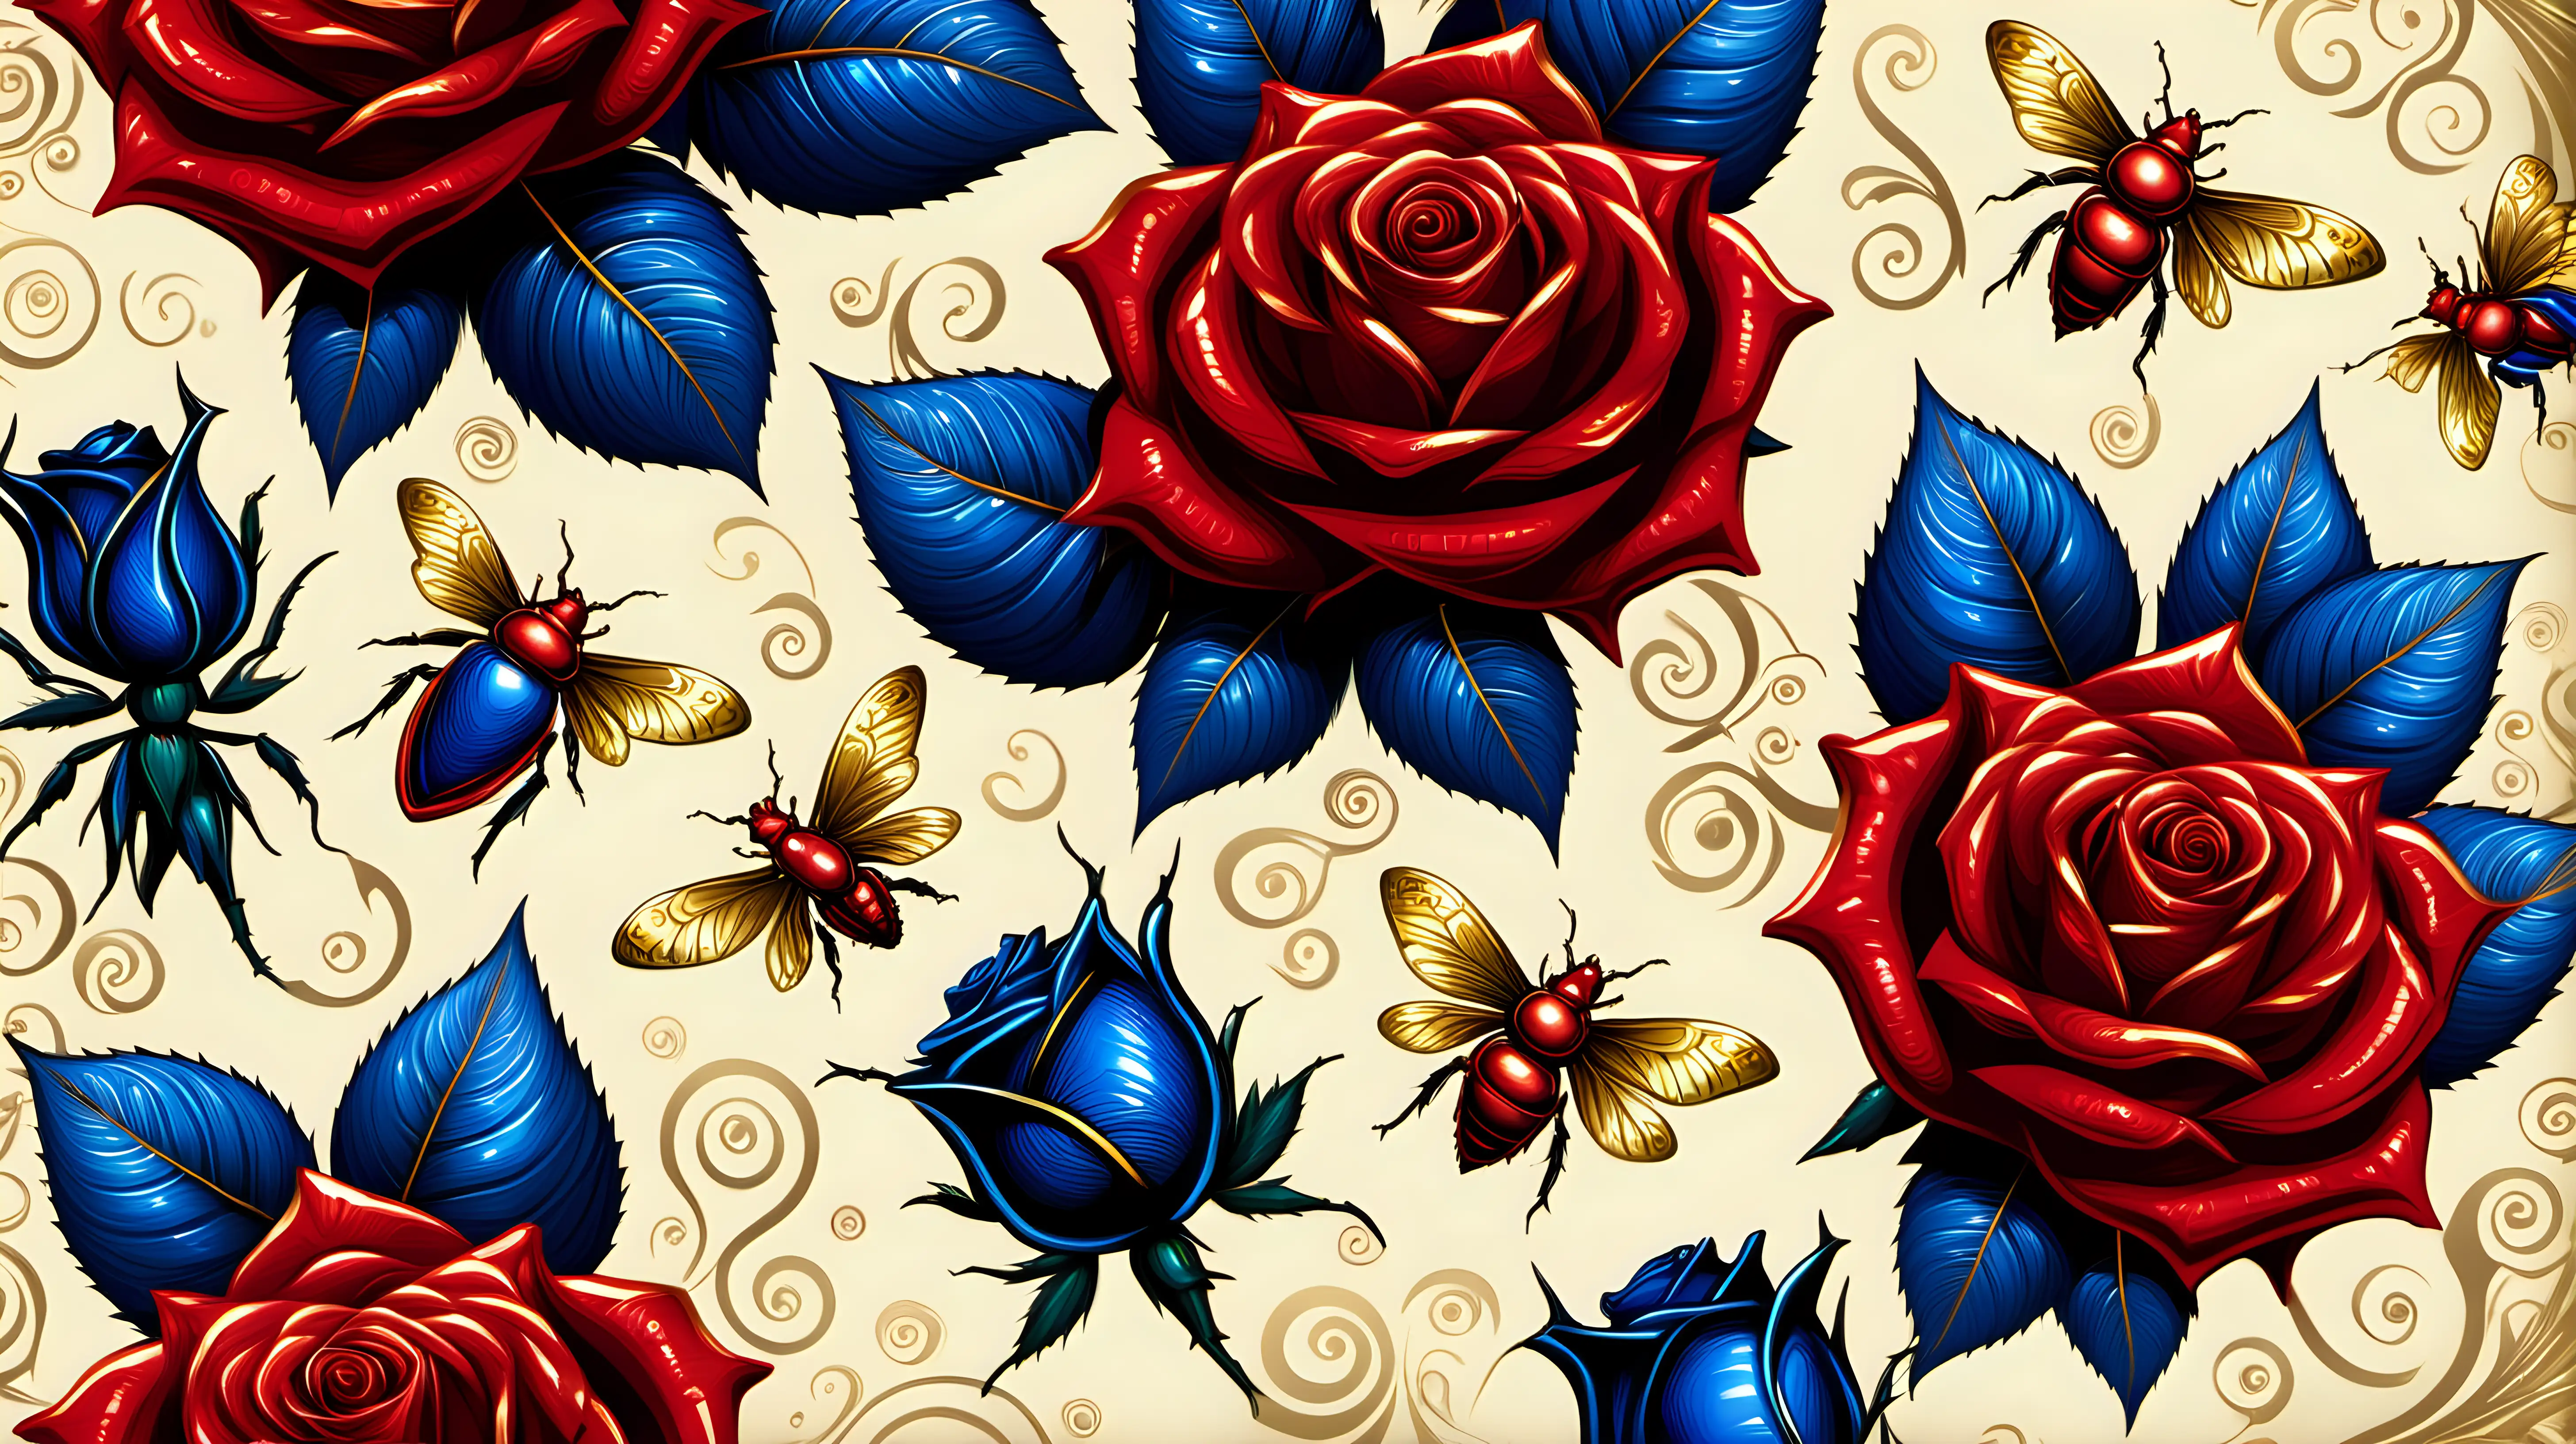 PATTERN OF GOLD AND BUG, RED, BLUE  ROSES